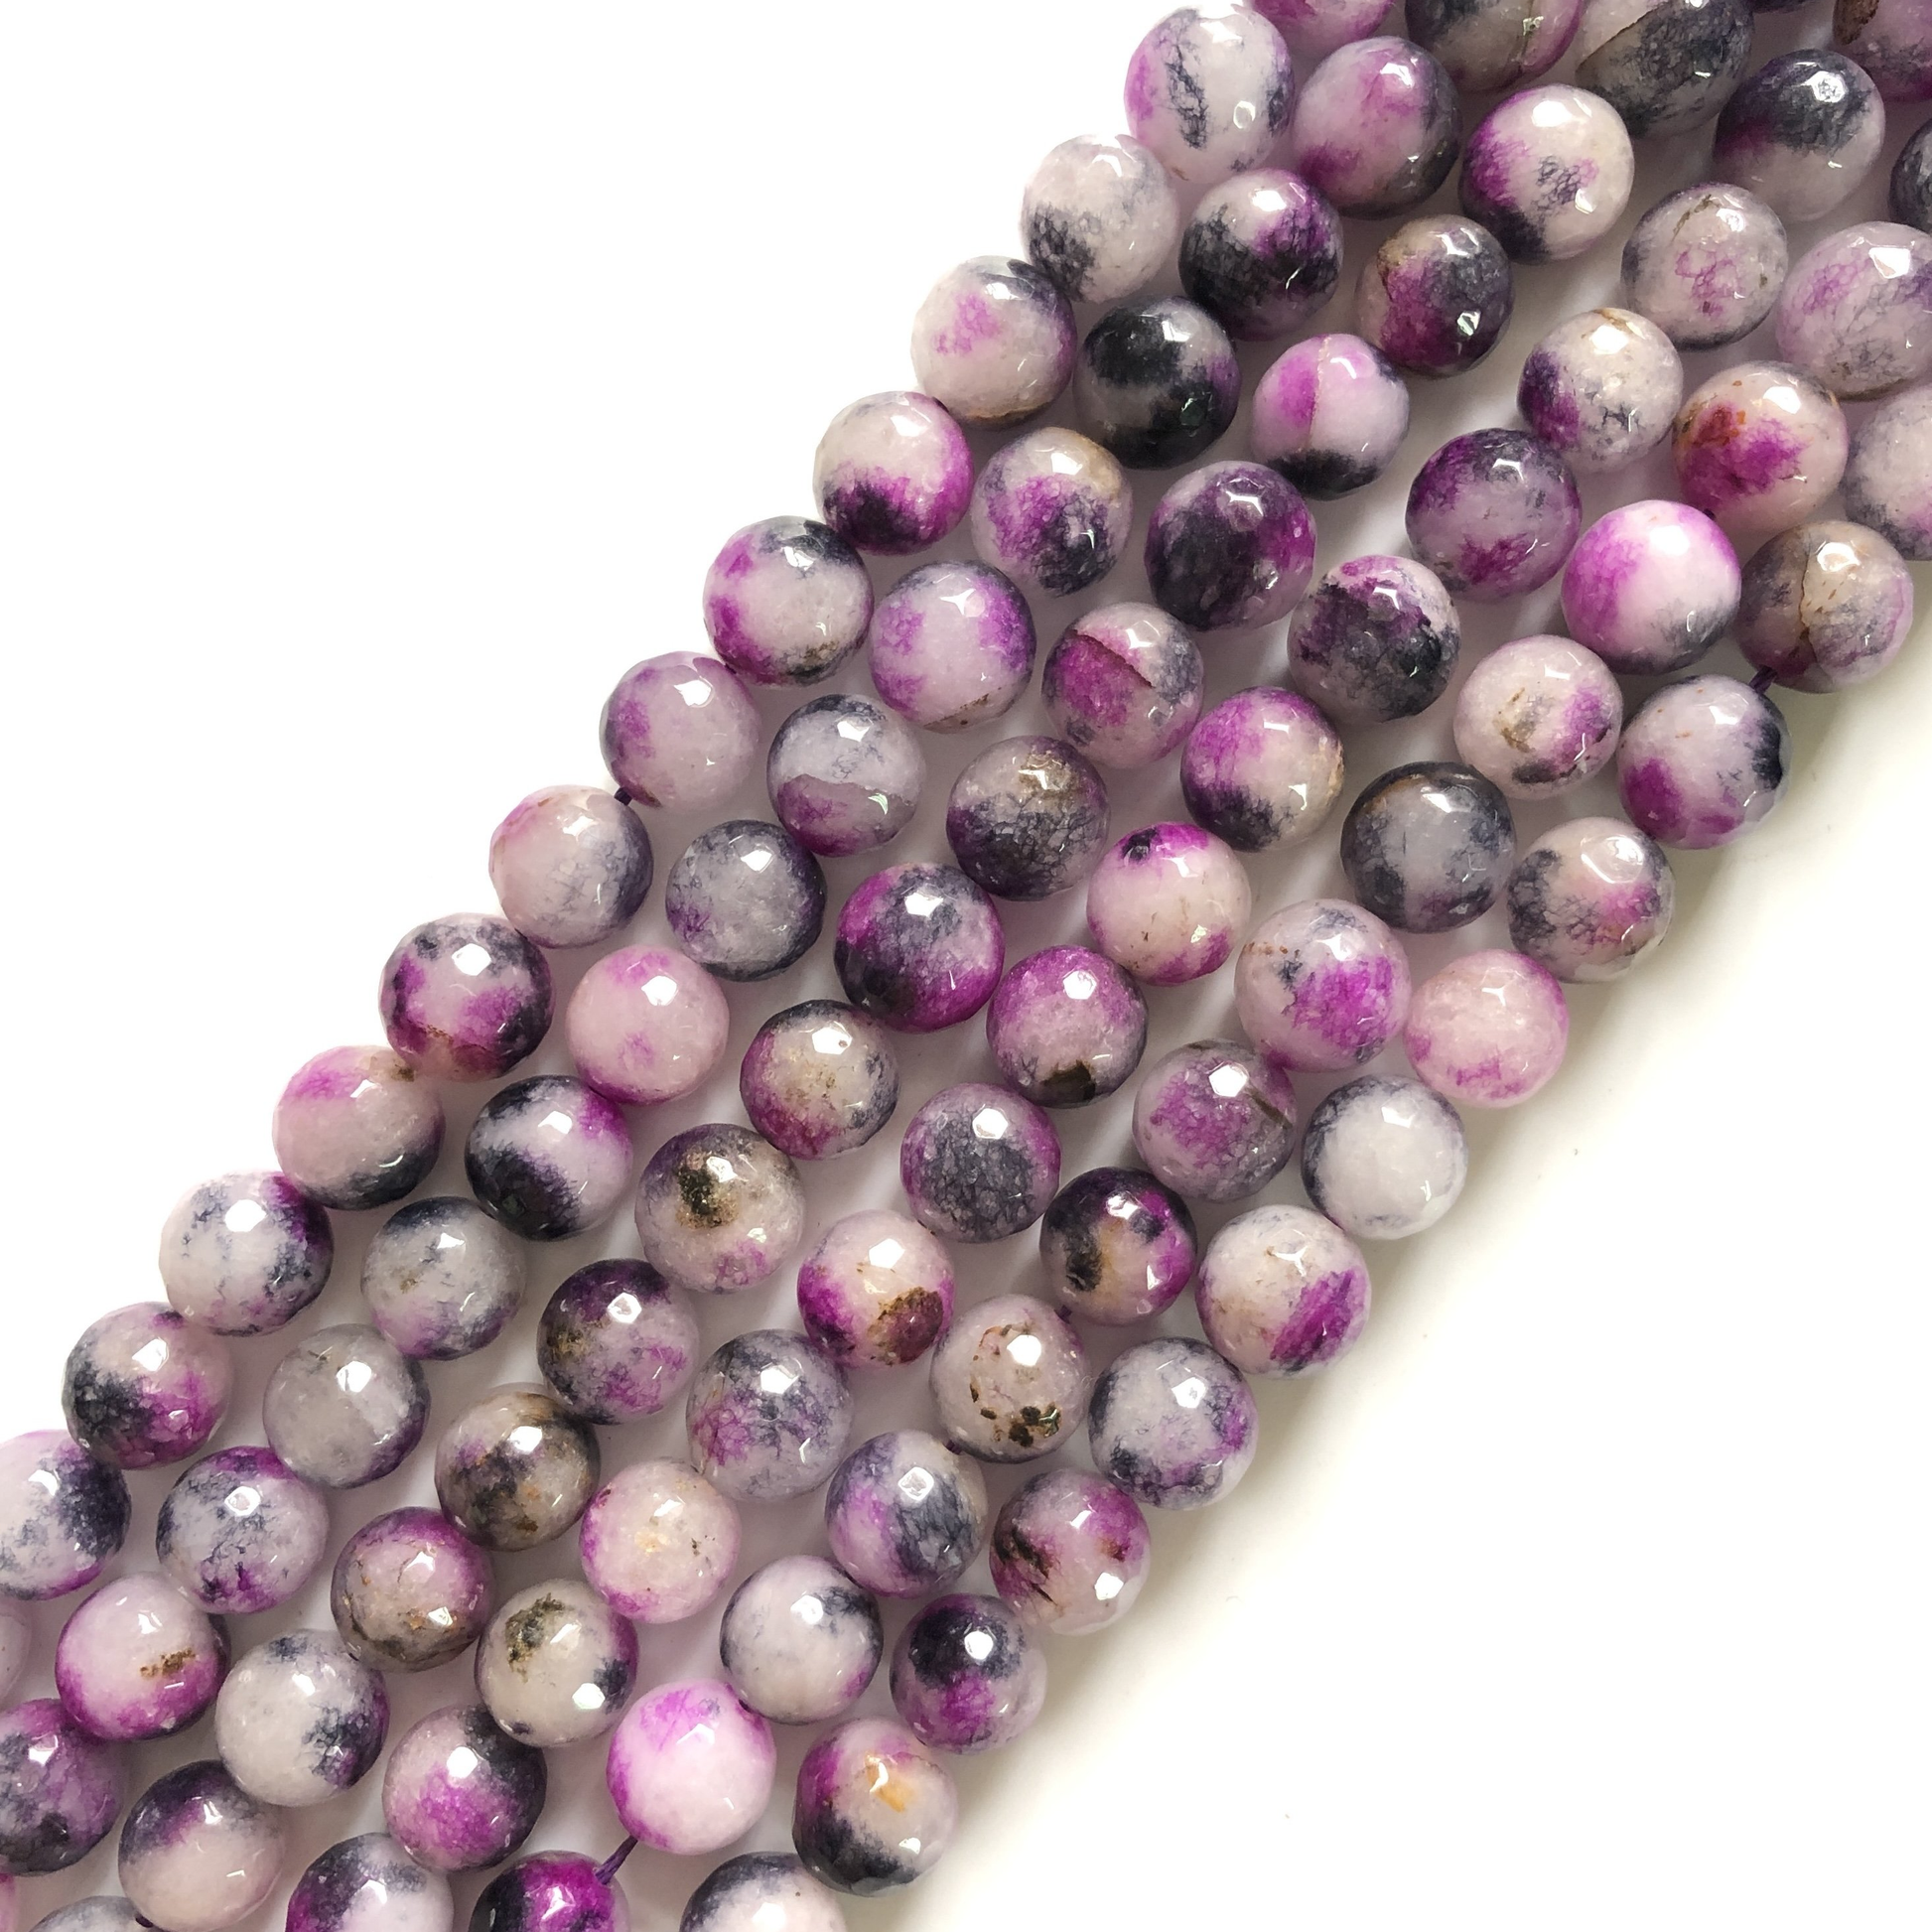 2 Strands/lot 10/12mm Fushcia White Agate Faceted Stone Beads Stone Beads 12mm Stone Beads Faceted Agate Beads Charms Beads Beyond